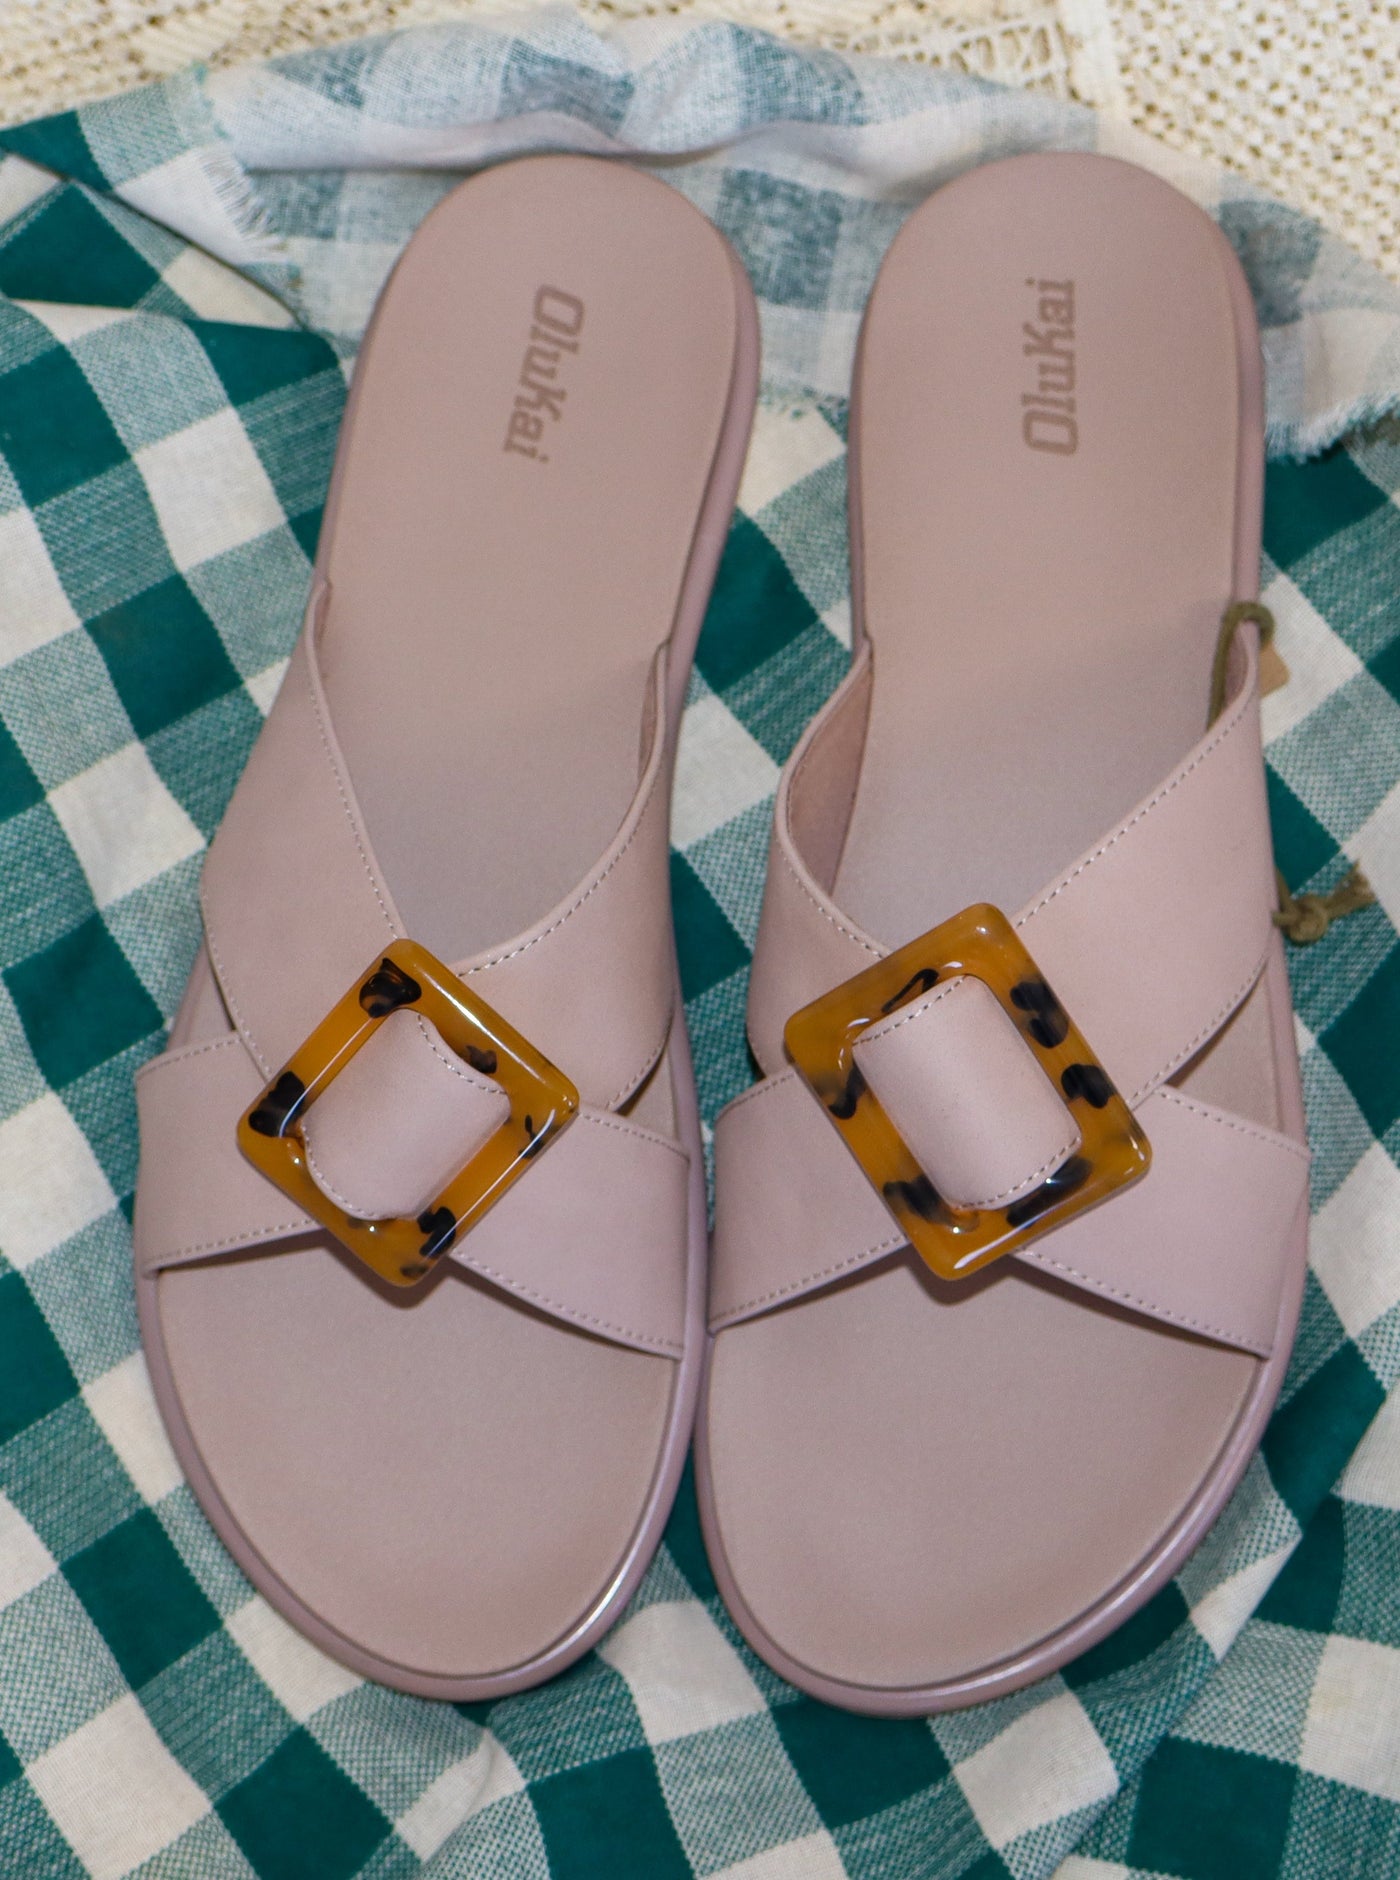 OluKai Taupe colored sandals with a tortoise clasp on the straps on top of the sandal.